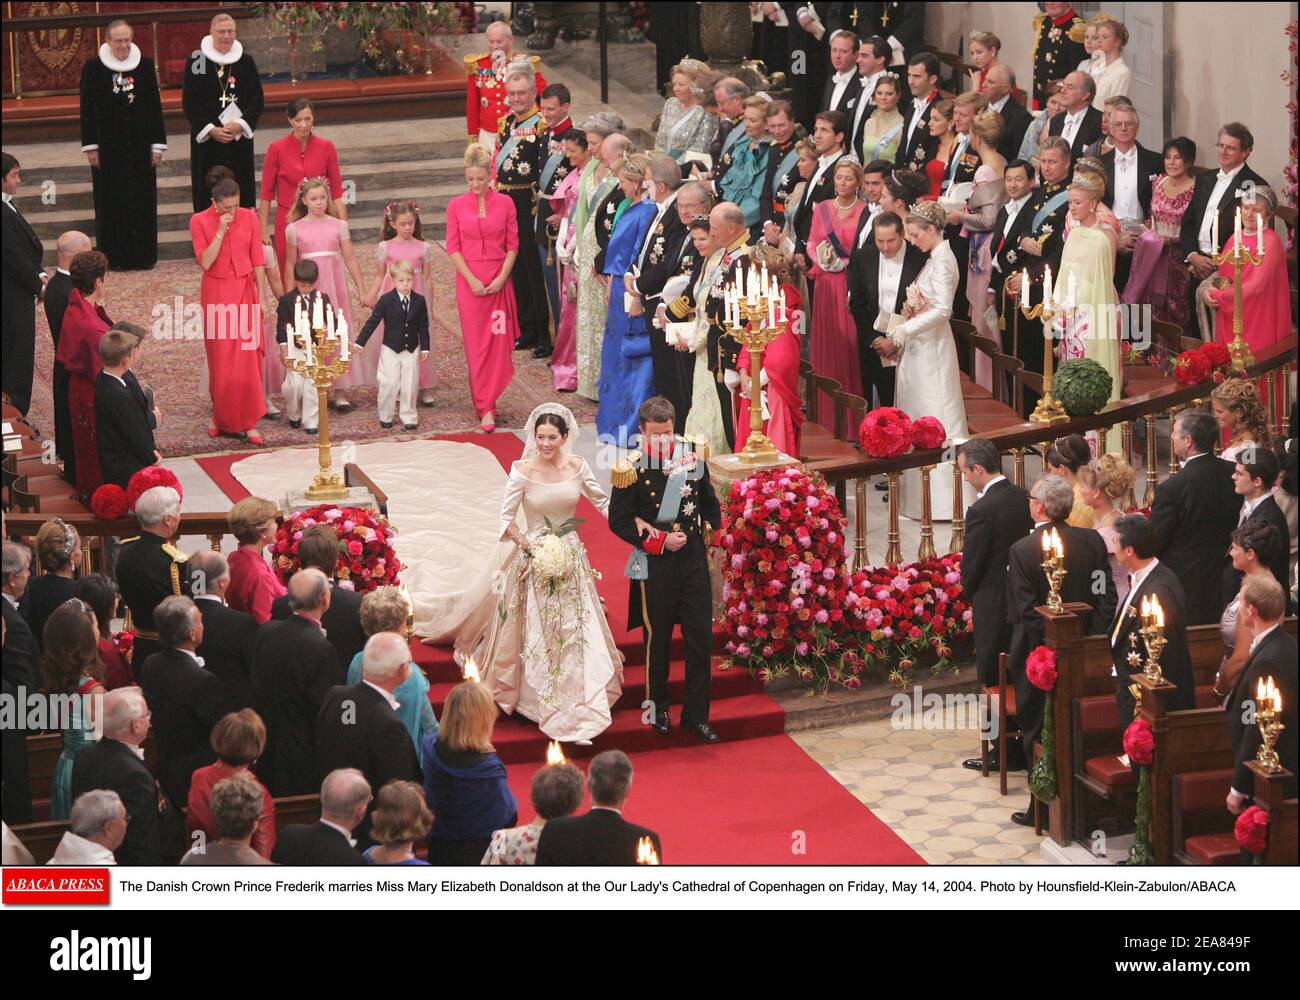 The Danish Crown Prince Frederik marries Miss Mary Elizabeth Donaldson at the Our Lady's Cathedral of Copenhagen on Friday, May 14, 2004. Photo by Hounsfield-Klein-Zabulon/ABACA Stock Photo